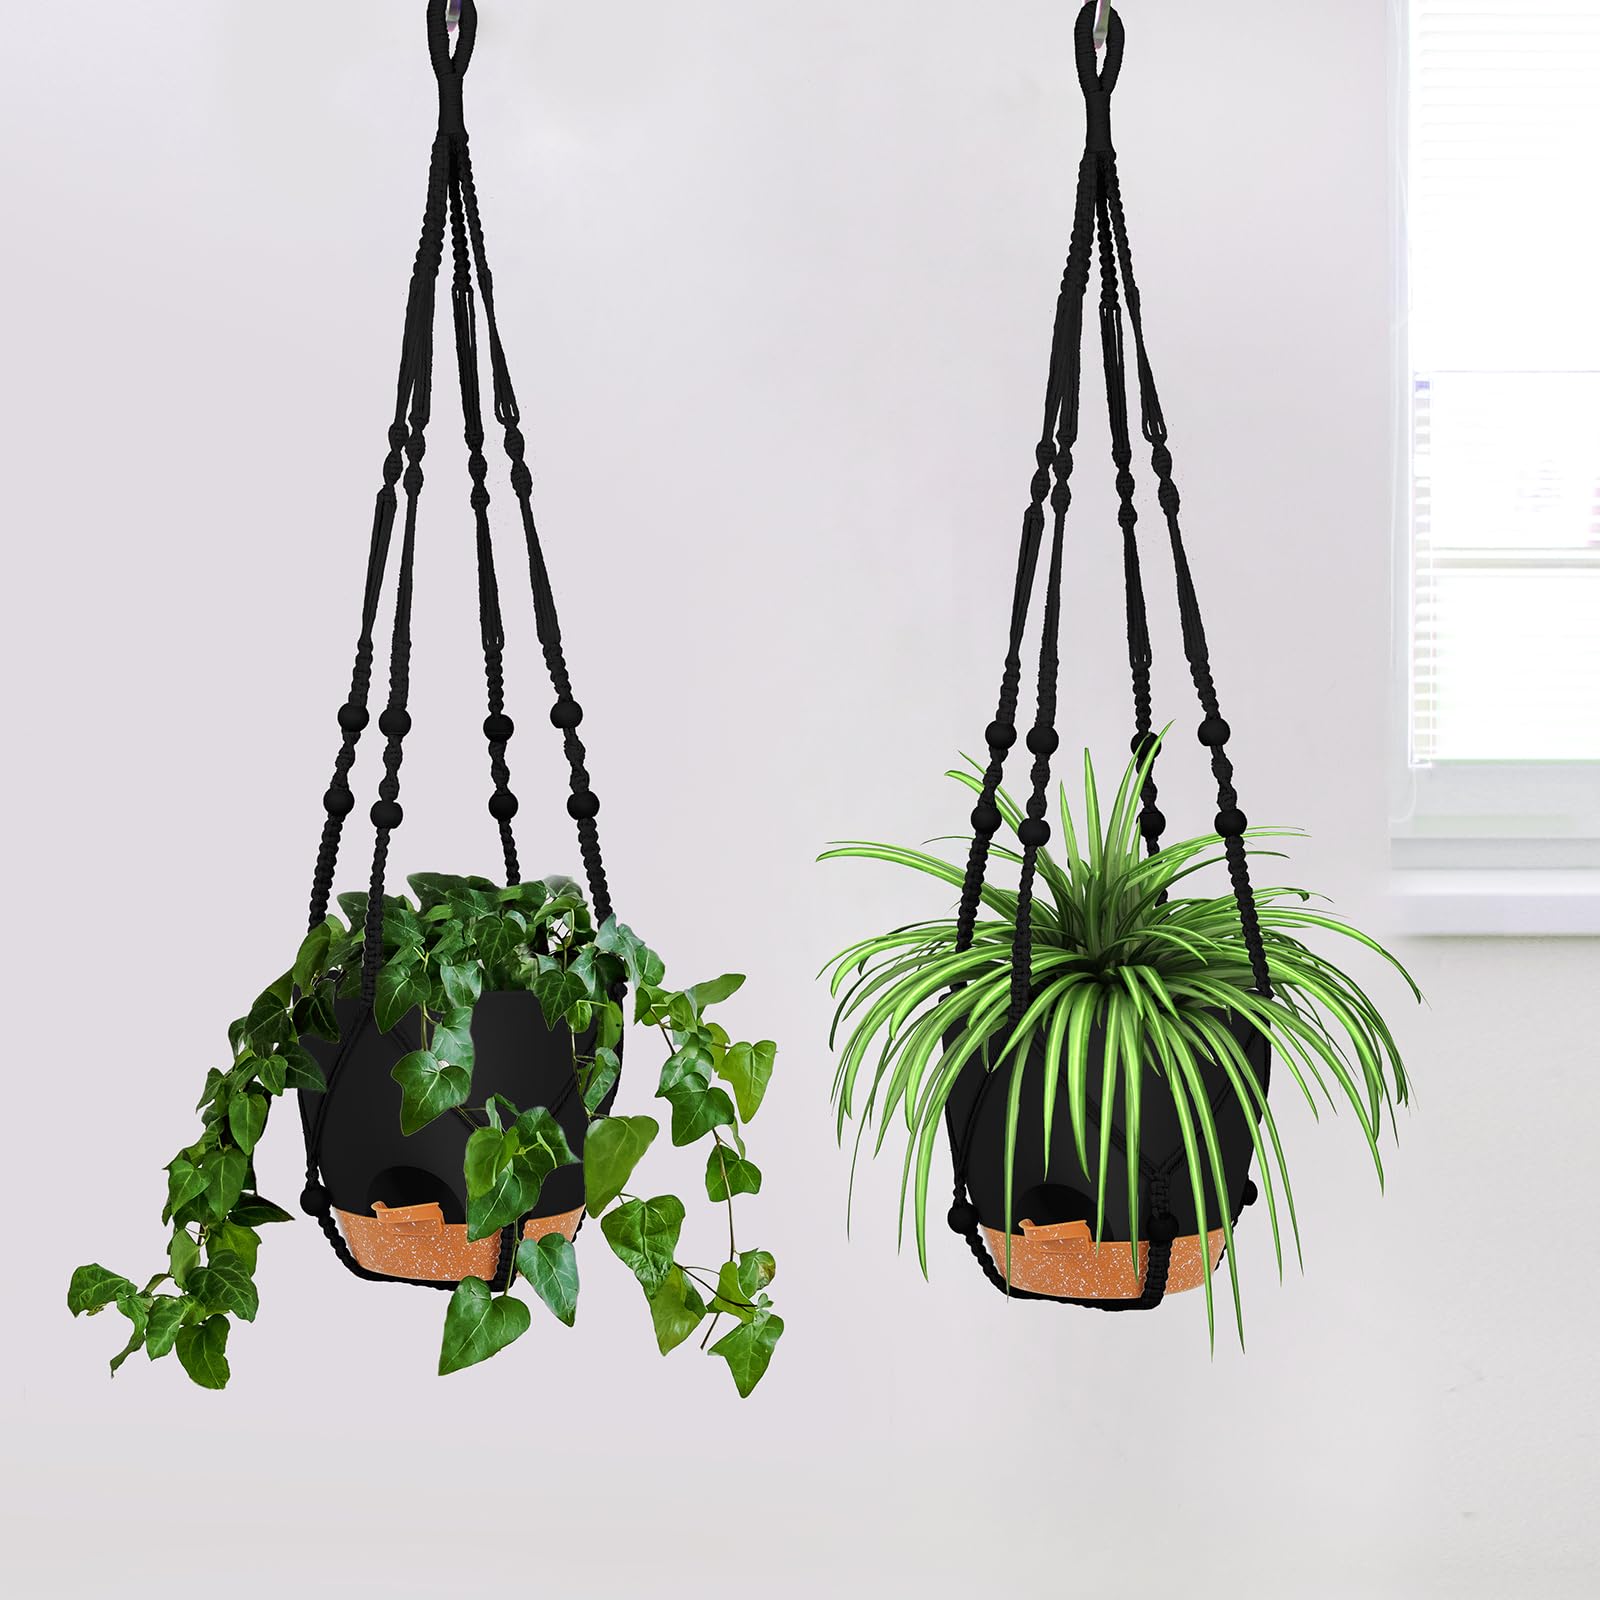 GARDIFE 8 Inch Hanging Planters with Macrame Plant Hanger for Indoor and Outdoor Plants, 2 Pack Large Self Watering Hanging Plant Pot with Basket Flower Pot with Drainage Hole, Black